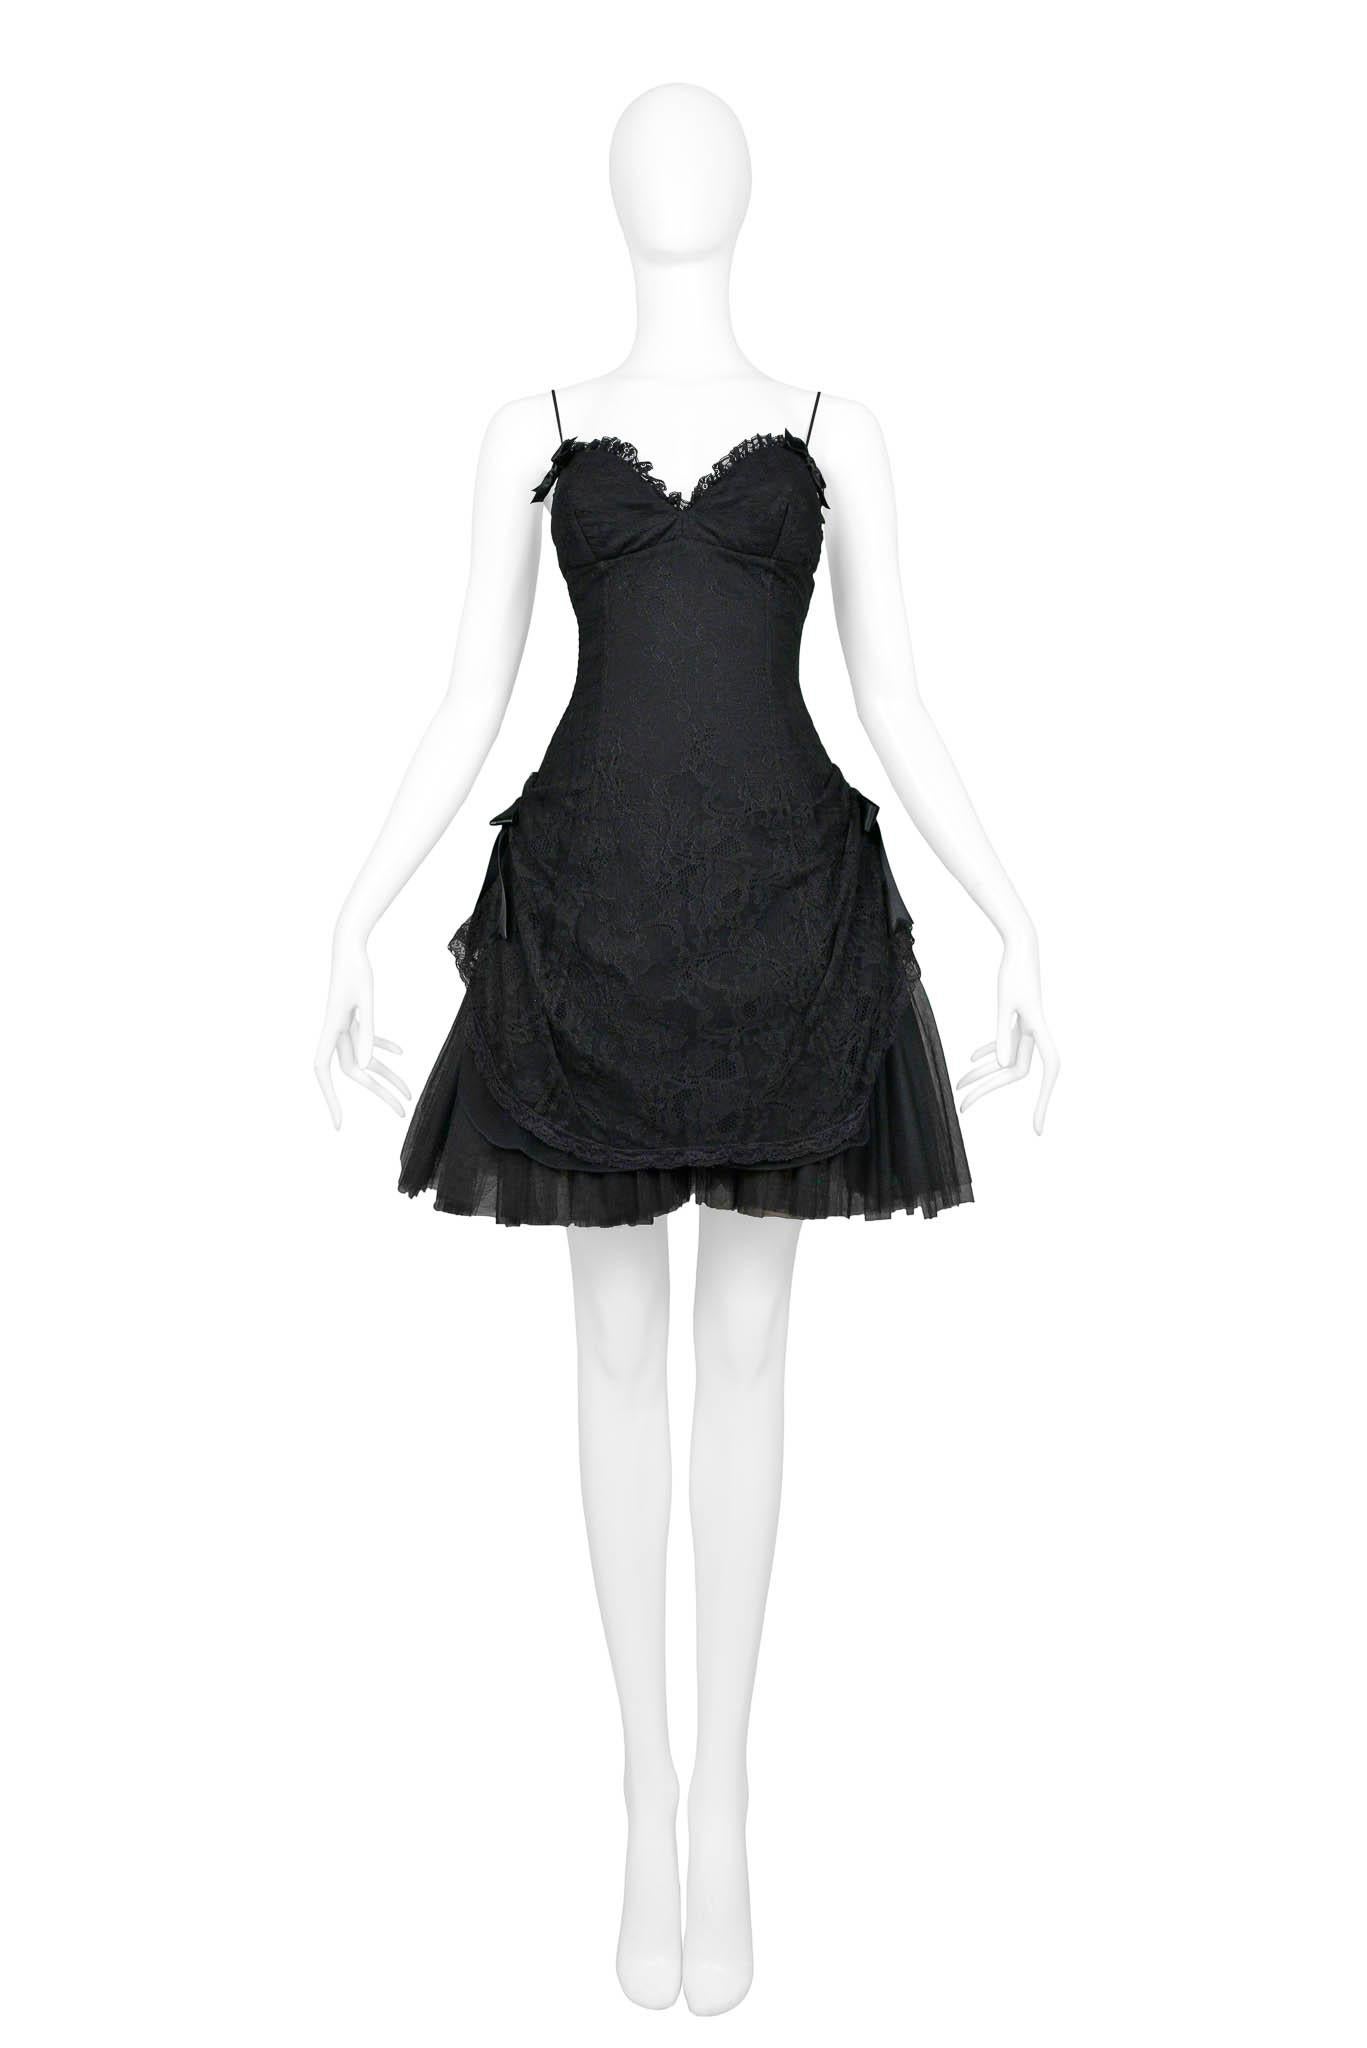 Resurrection Vintage is excited to offer a vintage Anna Molinari black party dress featuring skinny straps, gatherings at the hips, lace detailing, and black bow accents. 

Anna Molinari
Size: 42
Lace & Tulle
Excellent Vintage Condition
Authenticity